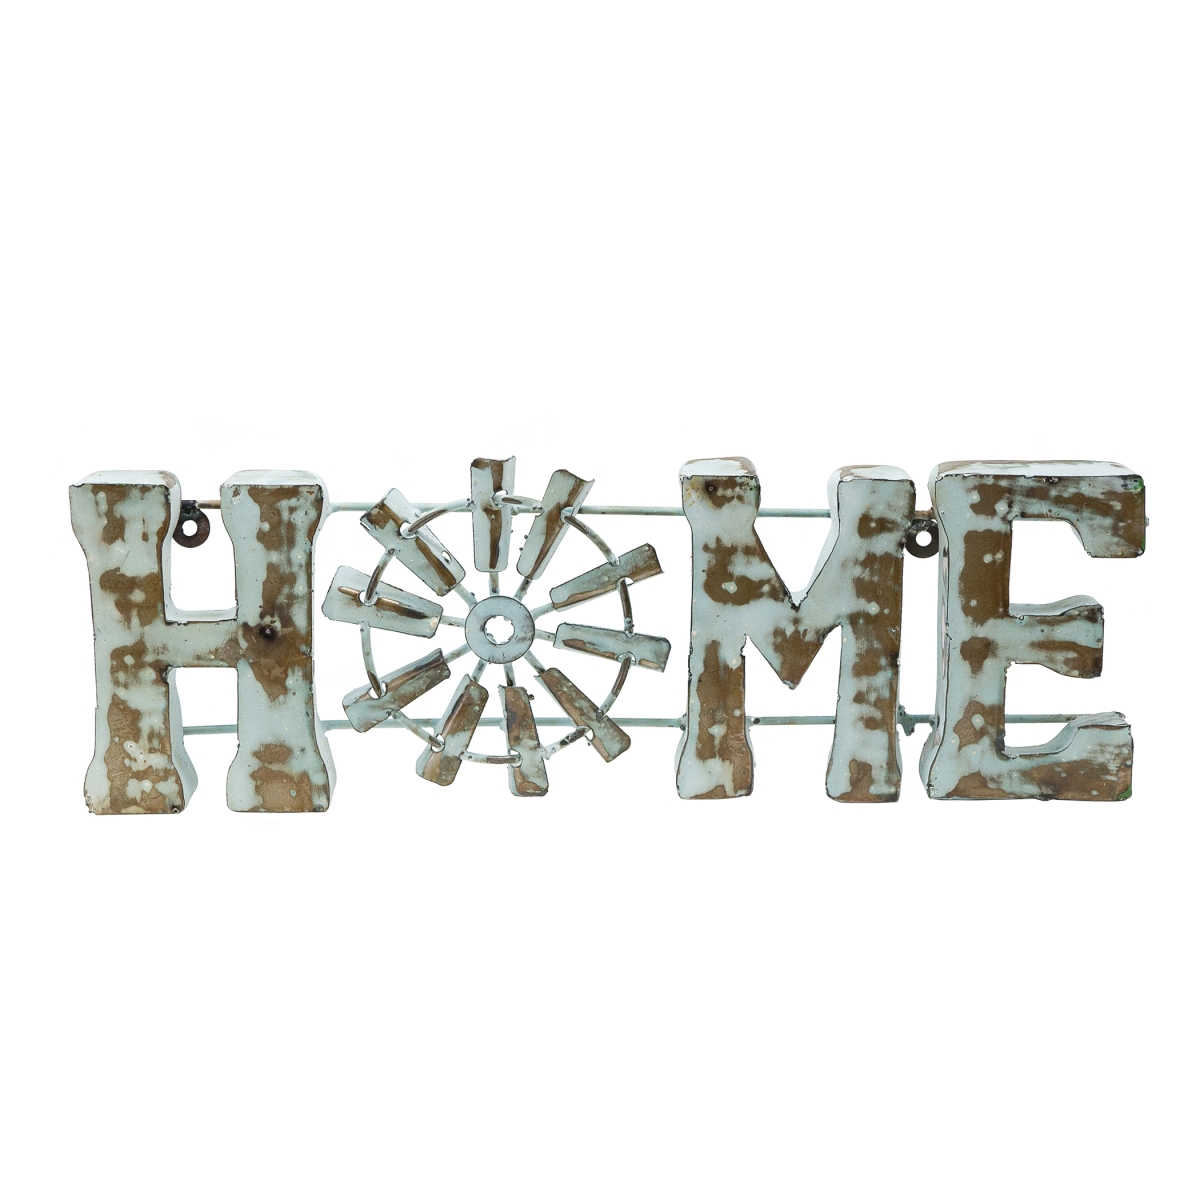 101102 Home With Windmill Mini Outdoor Wall Accent - Blue